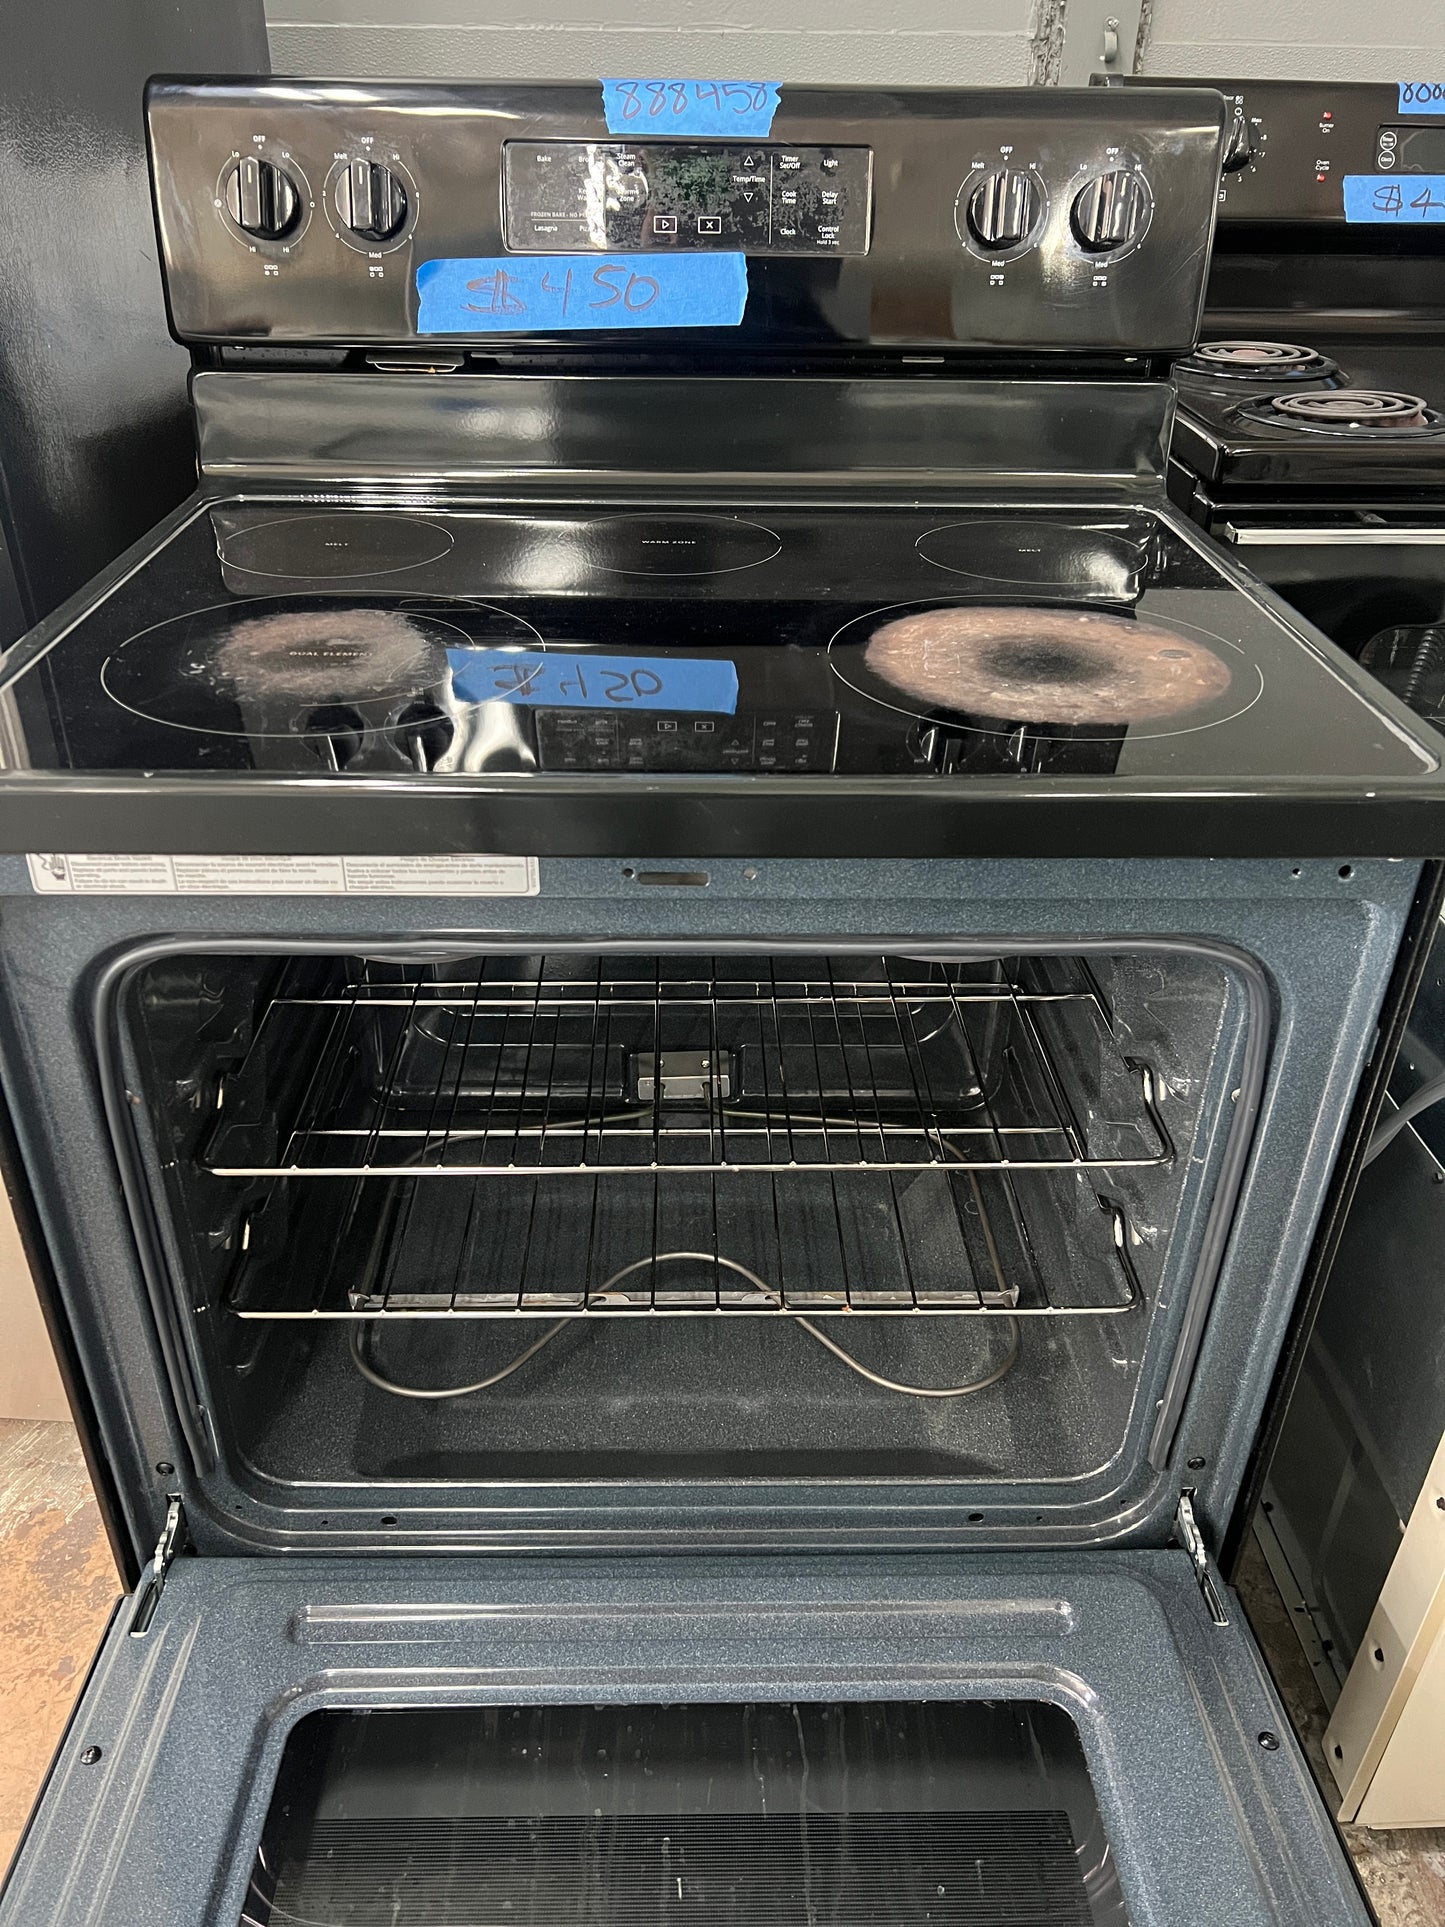 Whirlpool 30 inch Electric Glass-Top Range,WFE505W0HB,Used,Black,Stove,888458